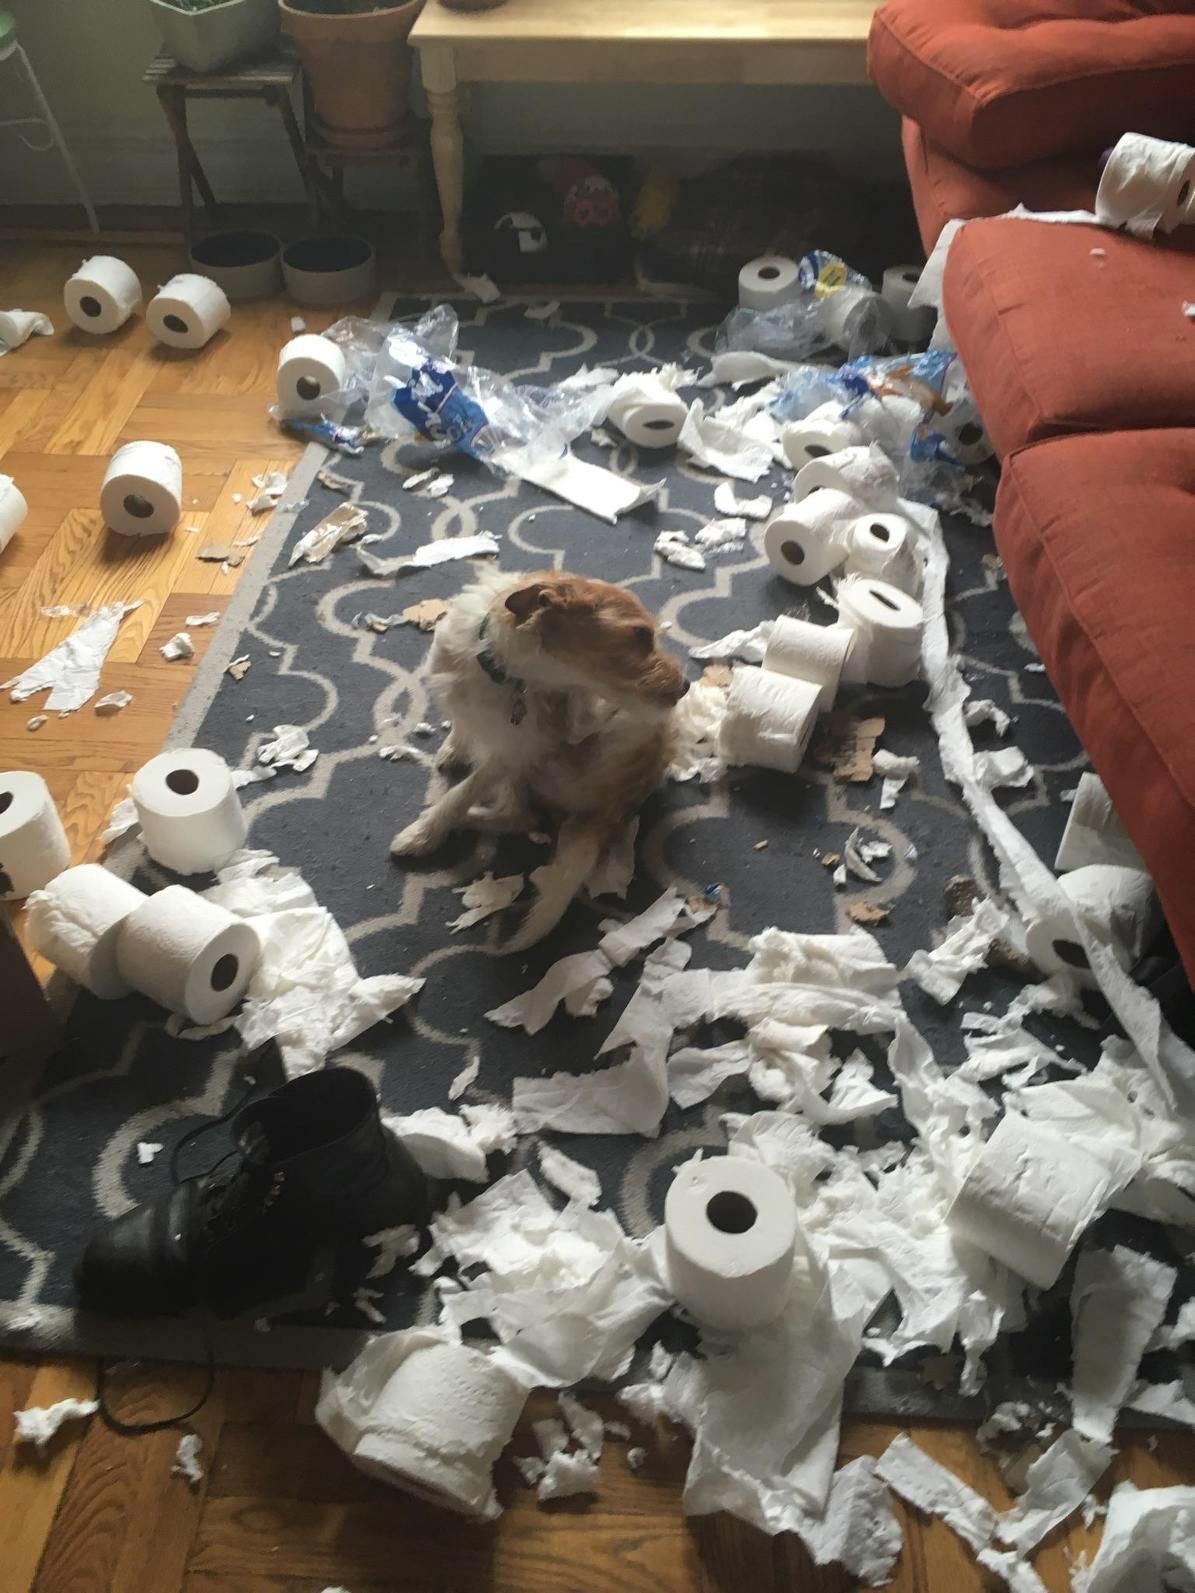 My friend's dog ate through 48 rolls of Charmin Ultra today.